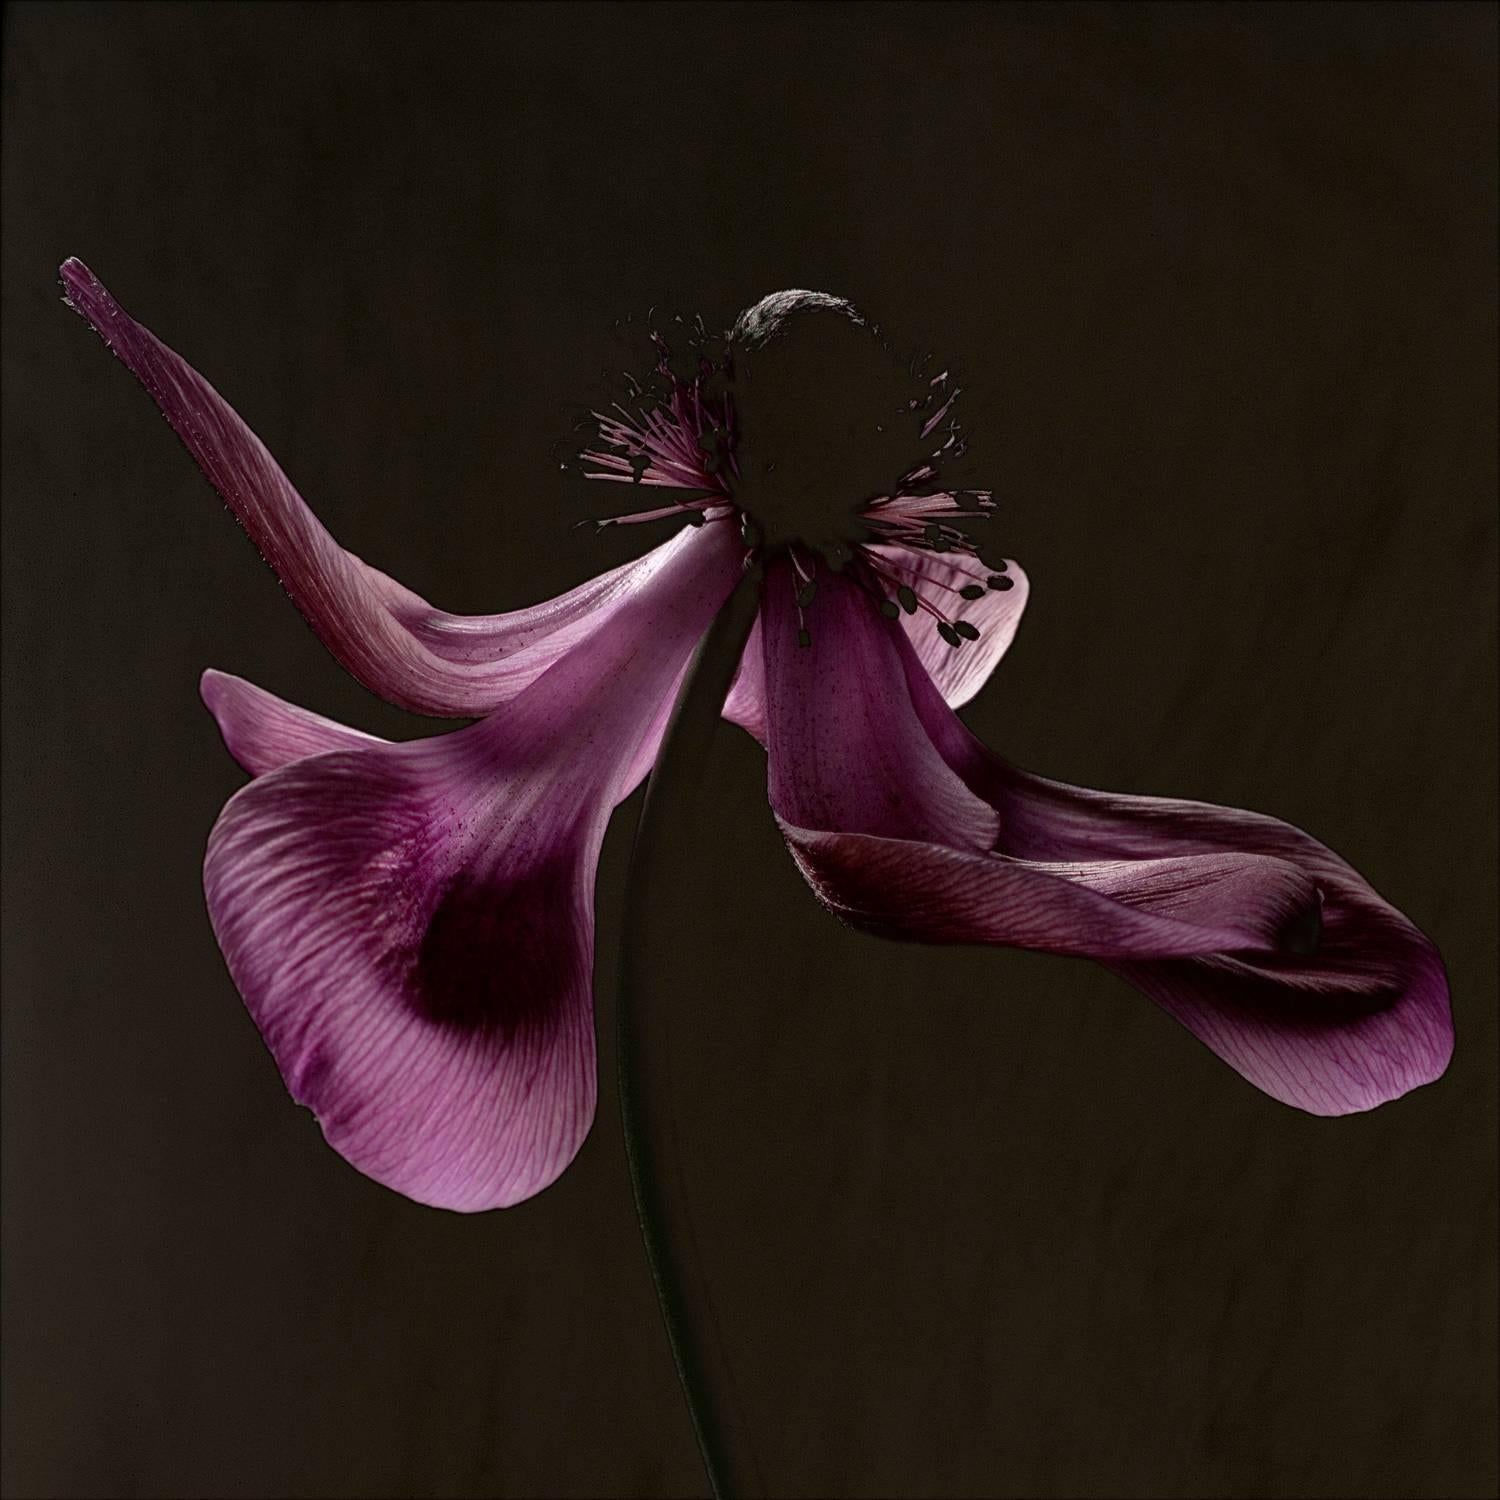 Carsten Witte Still-Life Photograph - Anemone - #2 of 5